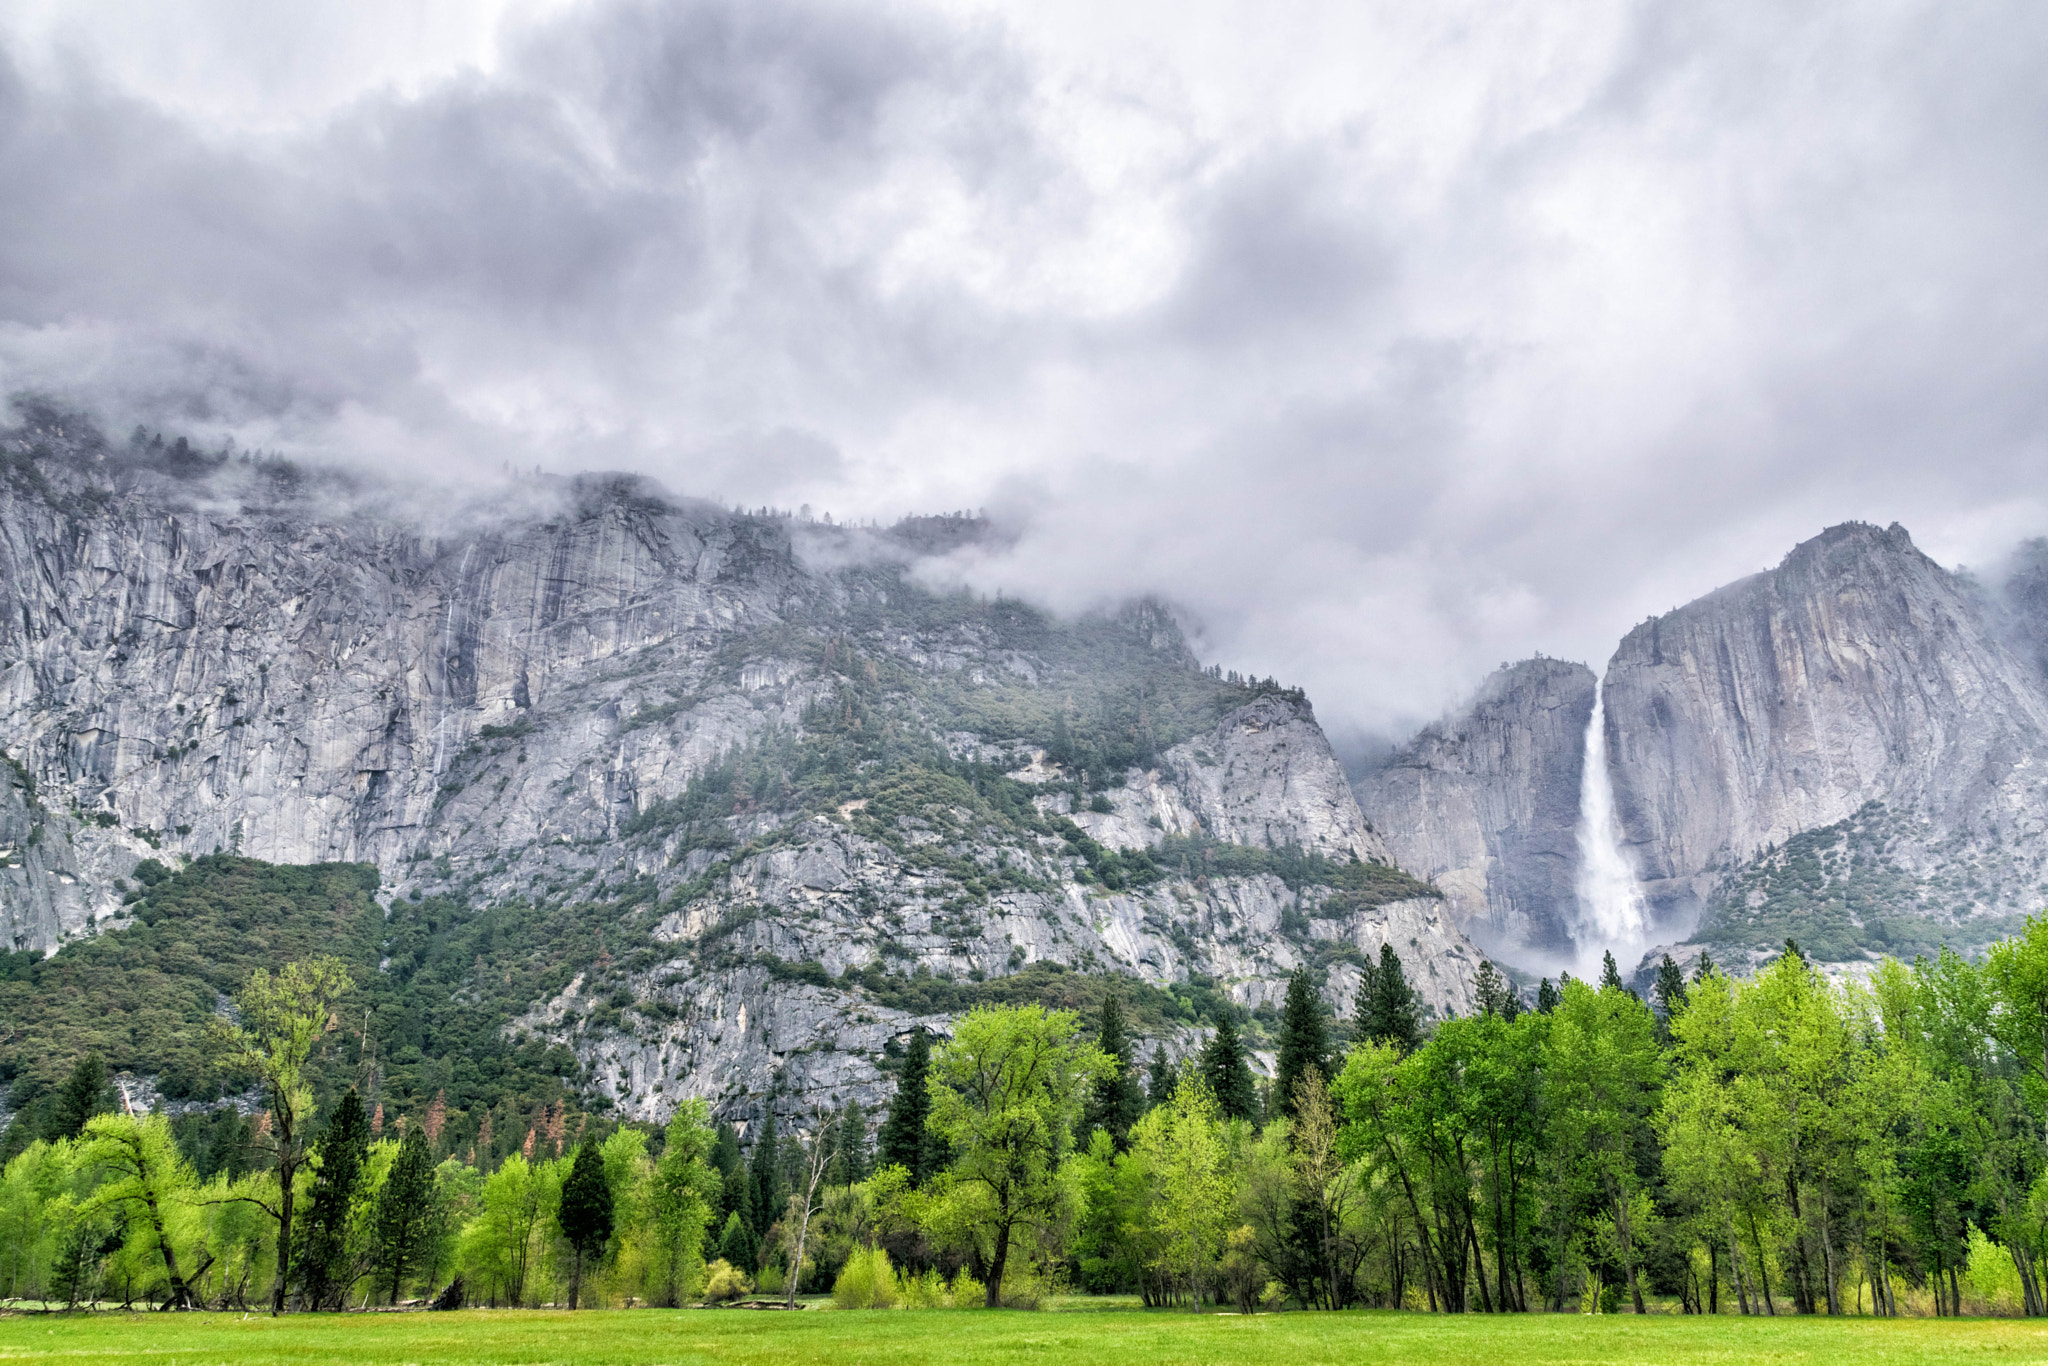 Nikon D3300 + Sigma 17-70mm F2.8-4 DC Macro OS HSM | C sample photo. Yosemite in the morning before the clouds burn off ... photography